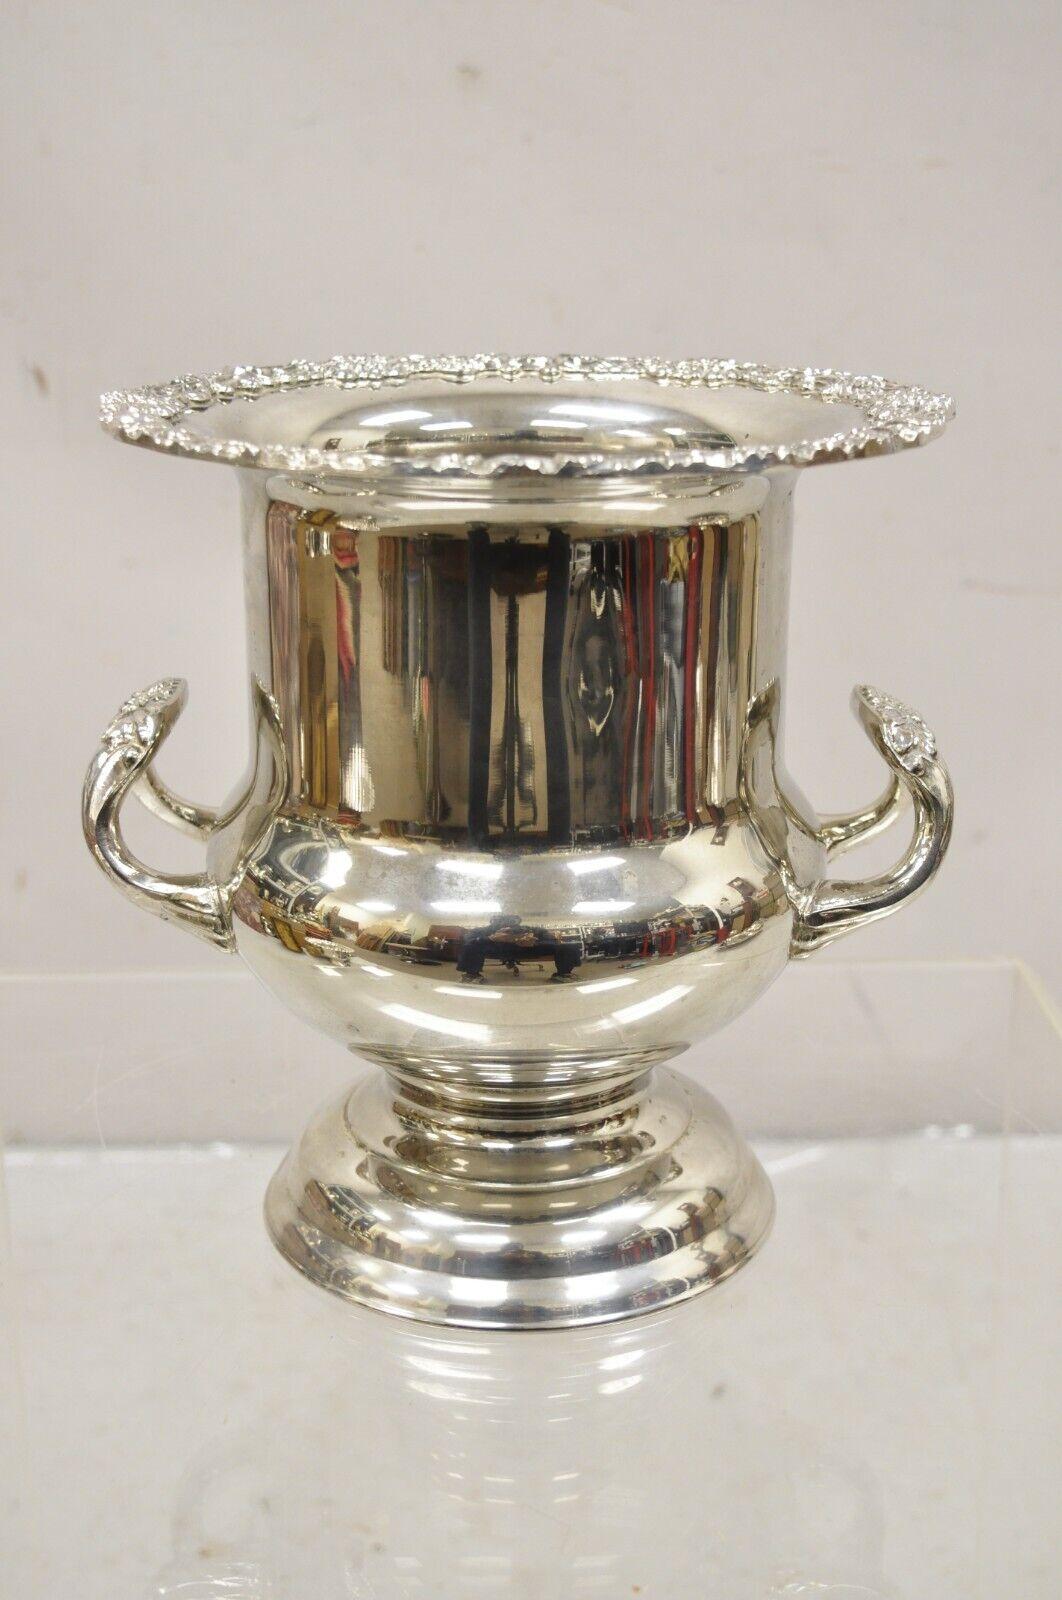 Vintage Victorian Style Trophy Cup Silver Plated Champagne Chiller Ice Bucket. Vers la fin du 20e siècle. Dimensions : 9,5